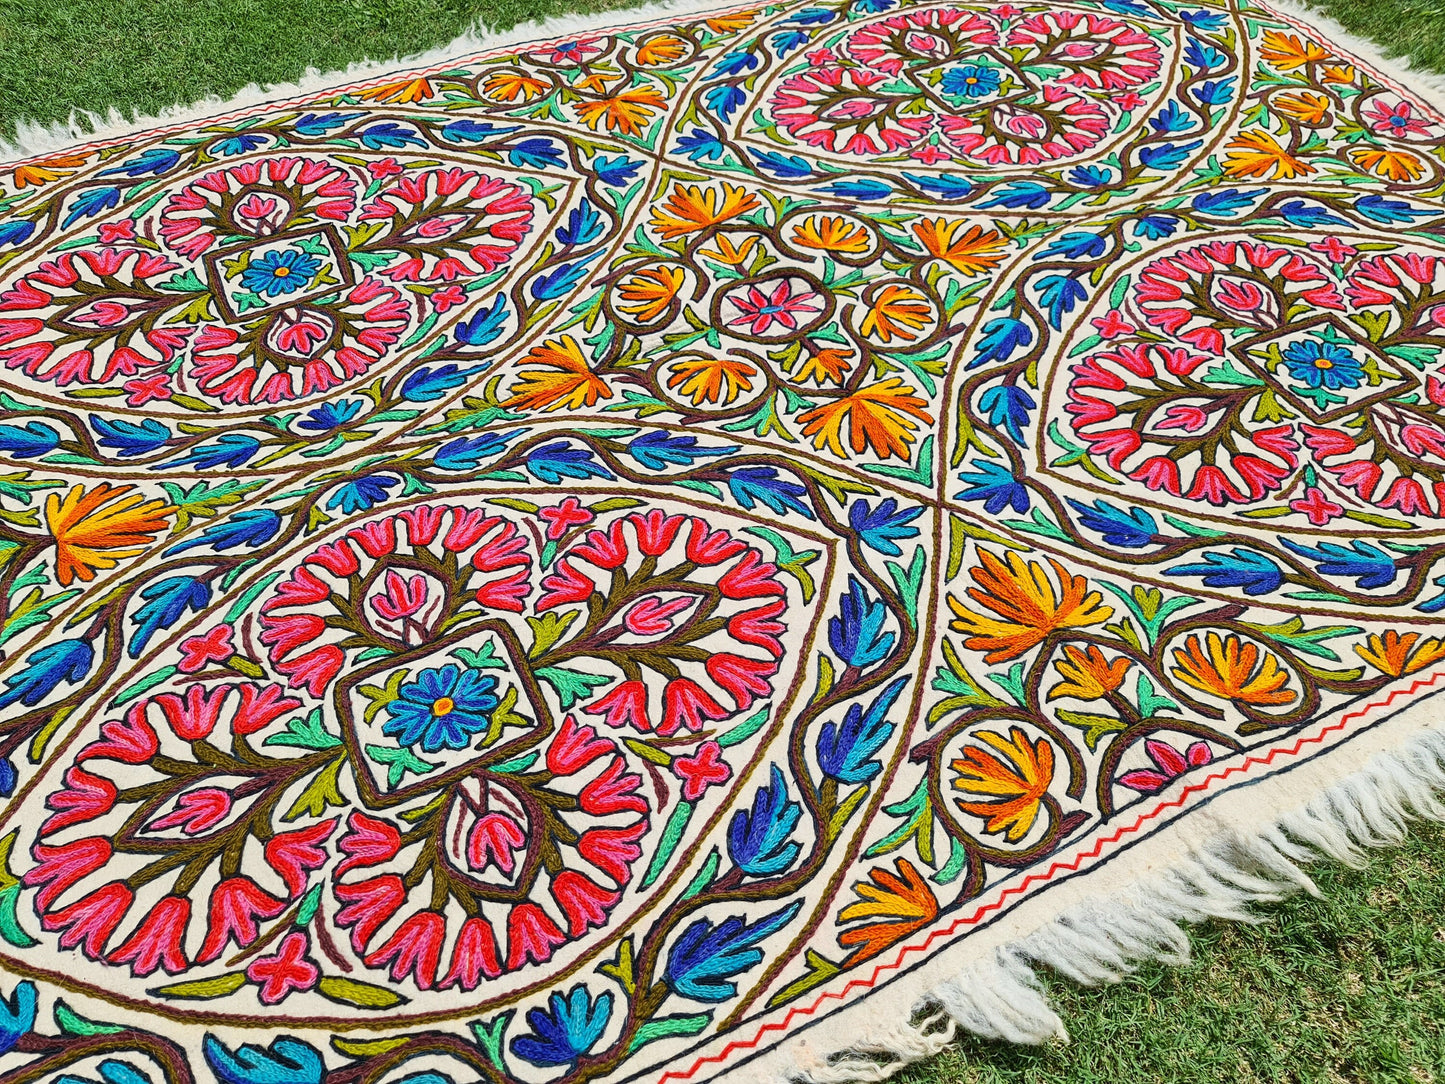 Warmth and Whimsy: Handmade Namda Wool Rug 5x7ft – Crafted with Love in Kashmir for Cozy Floors and Boho Flair